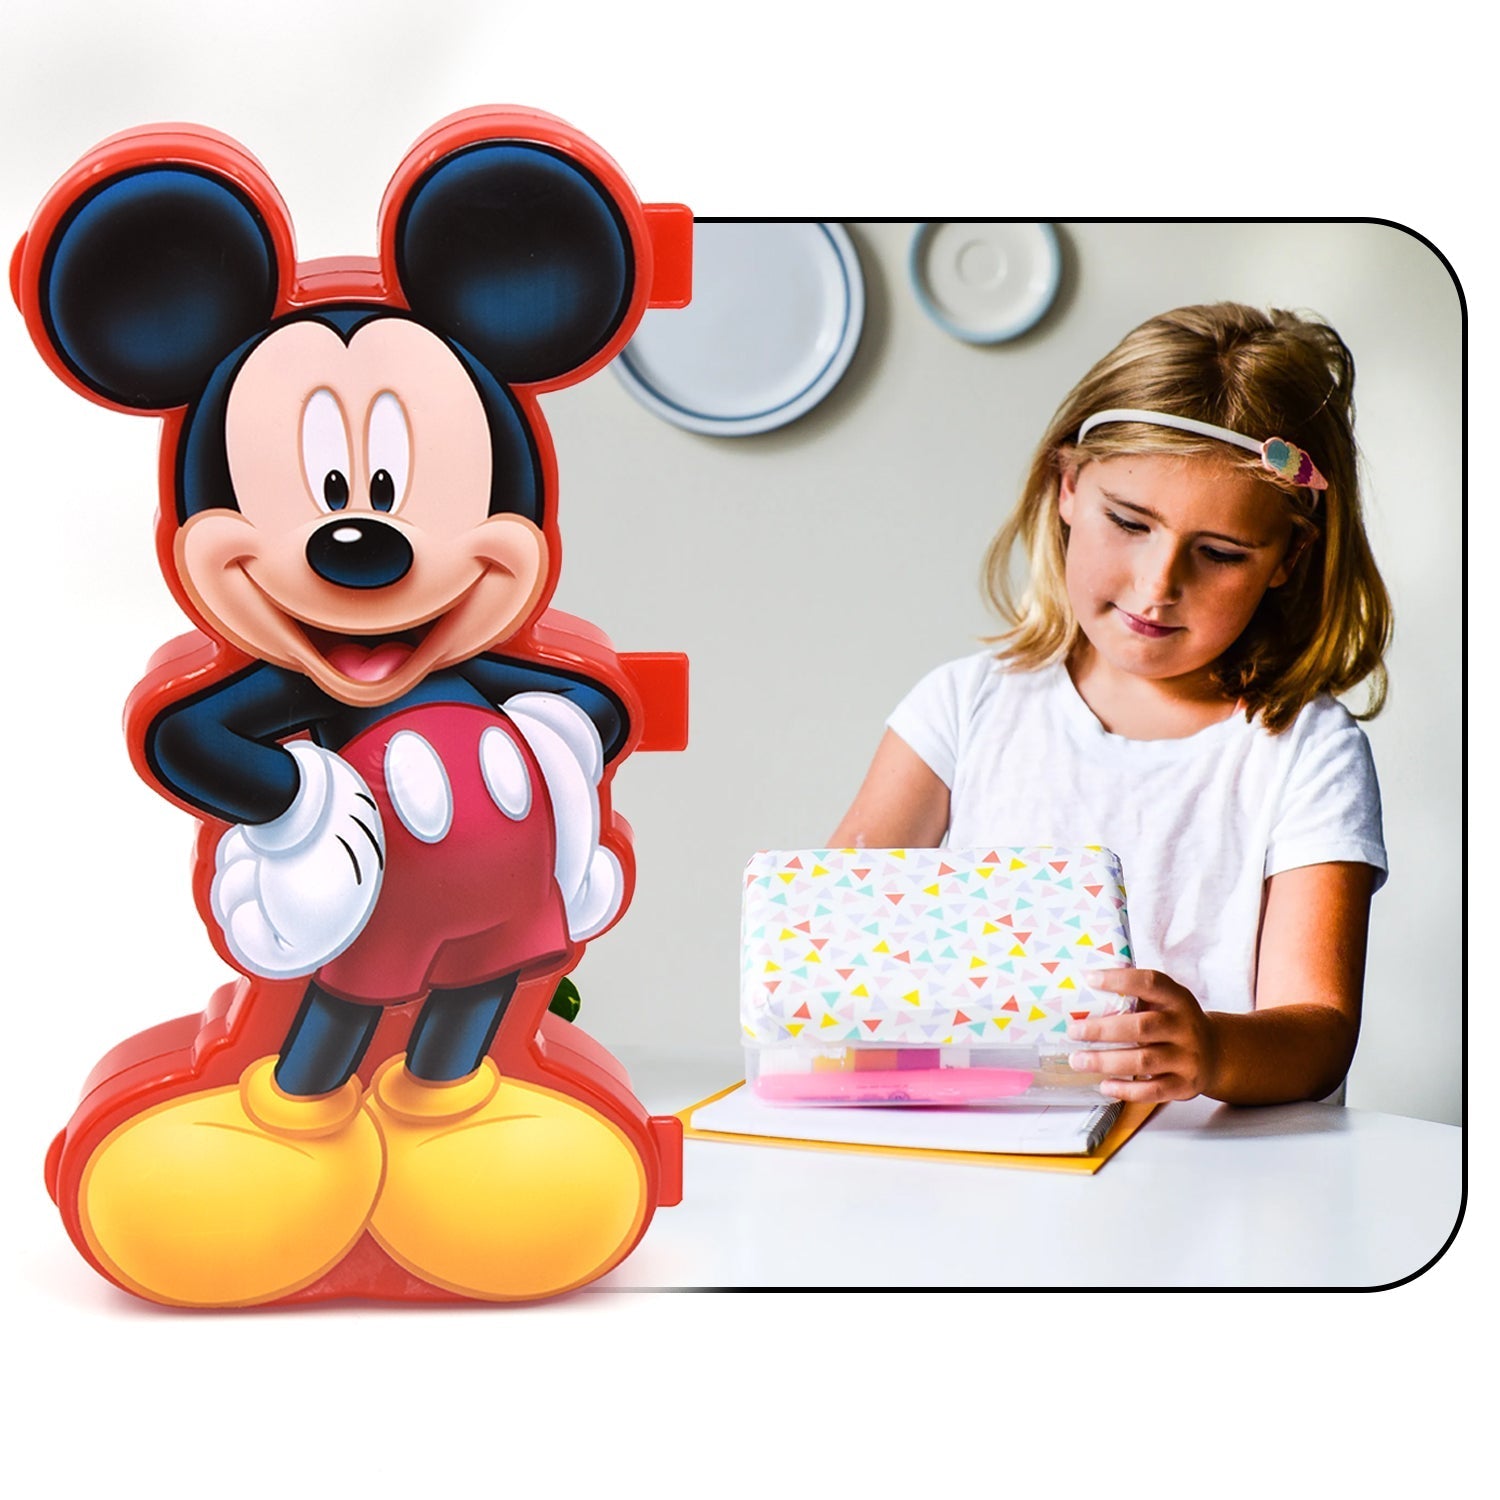 8083 Mickey M Pencil Box Used for holding pencils and stationary items by kids. freeshipping - DeoDap